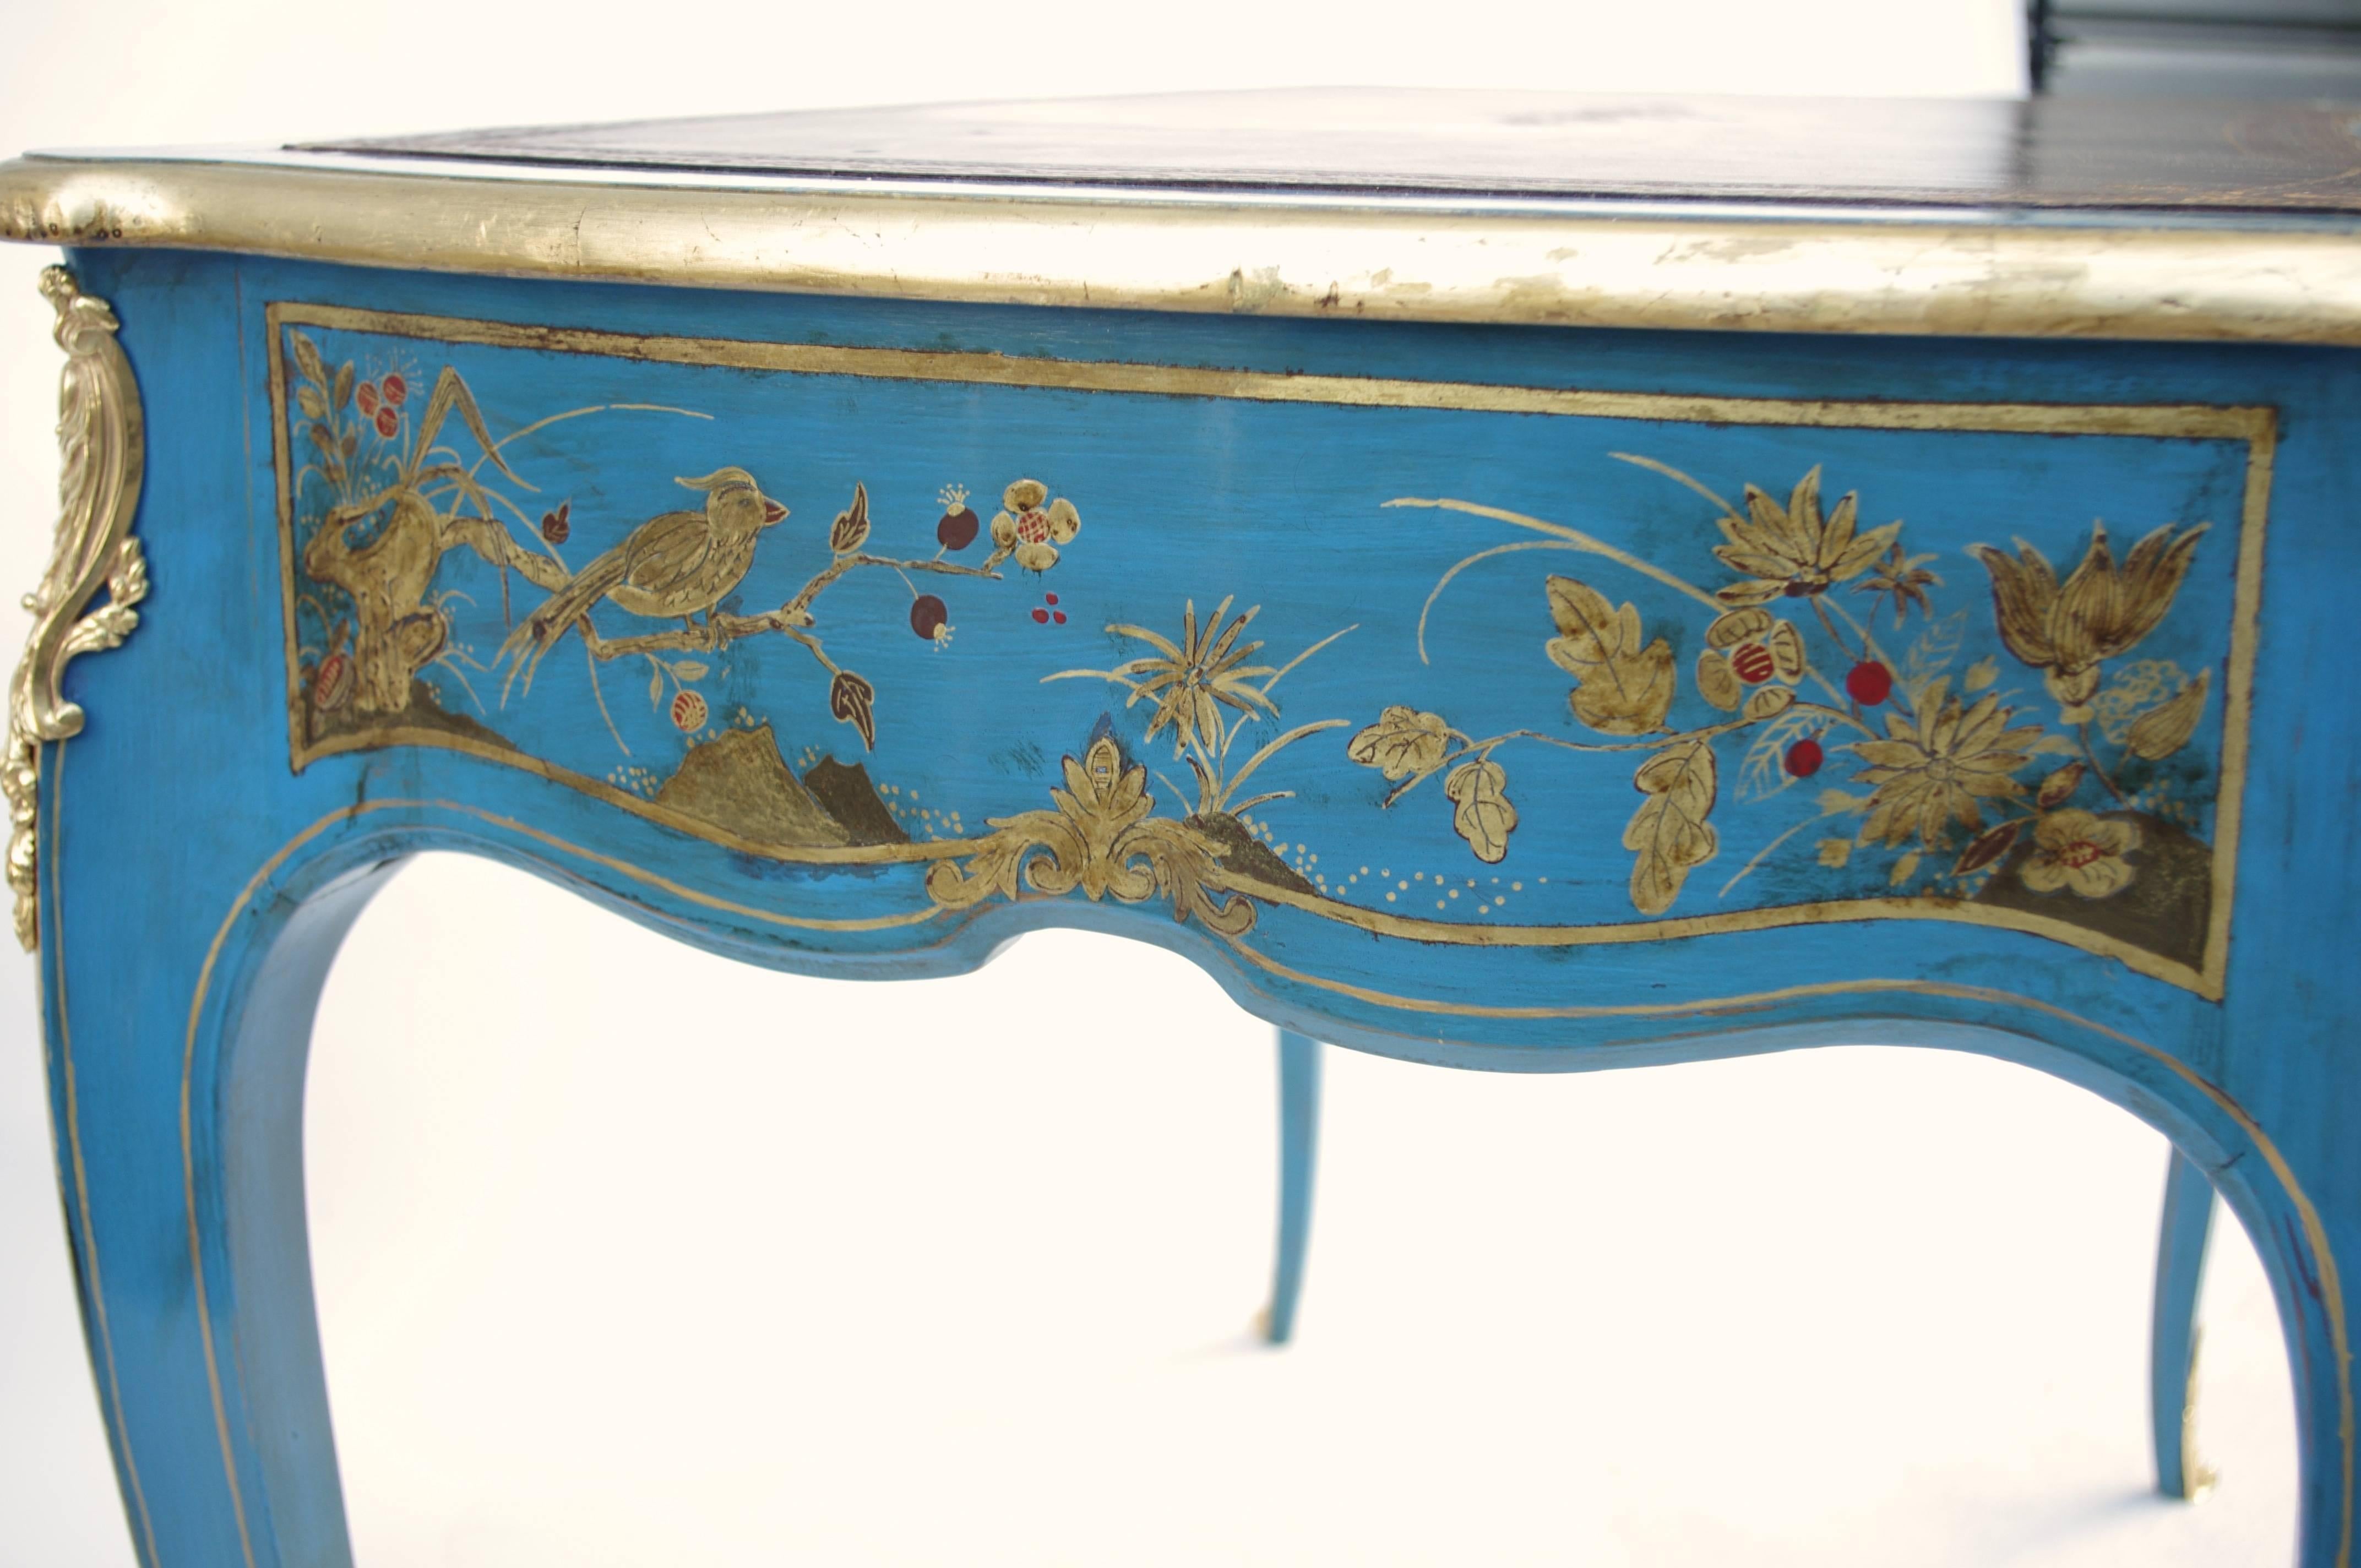 Louis XV style.
Chinese gilt decor on blue lacquer.
Gilt and chiseled bronze.
Dark top brown leather.
French work, circa 1900.